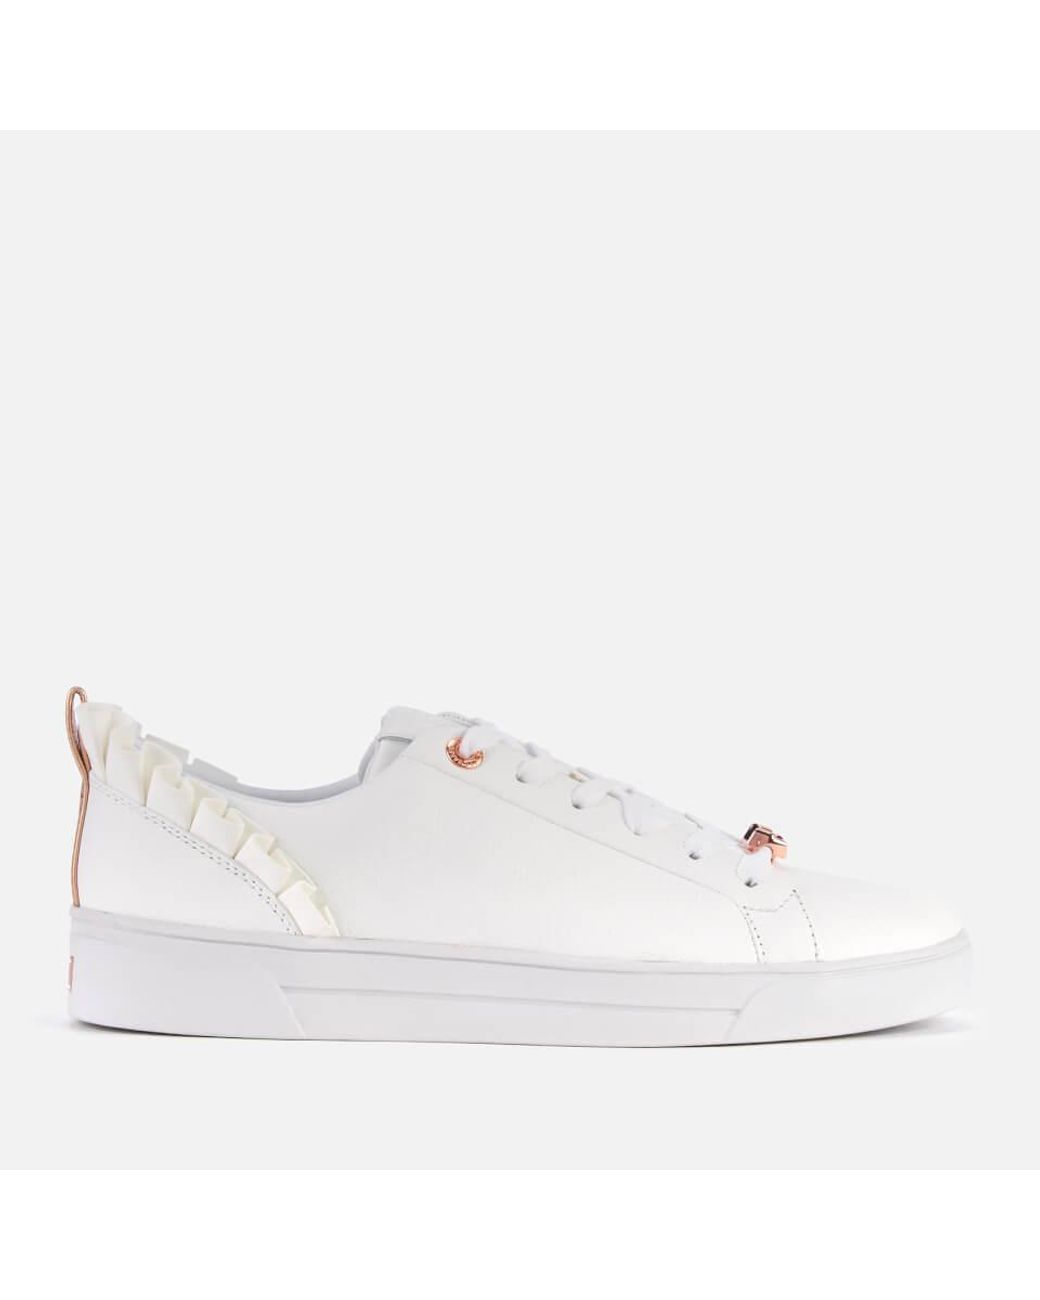 Ted Baker Astrina Leather Frill Low Top Trainers in White | Lyst